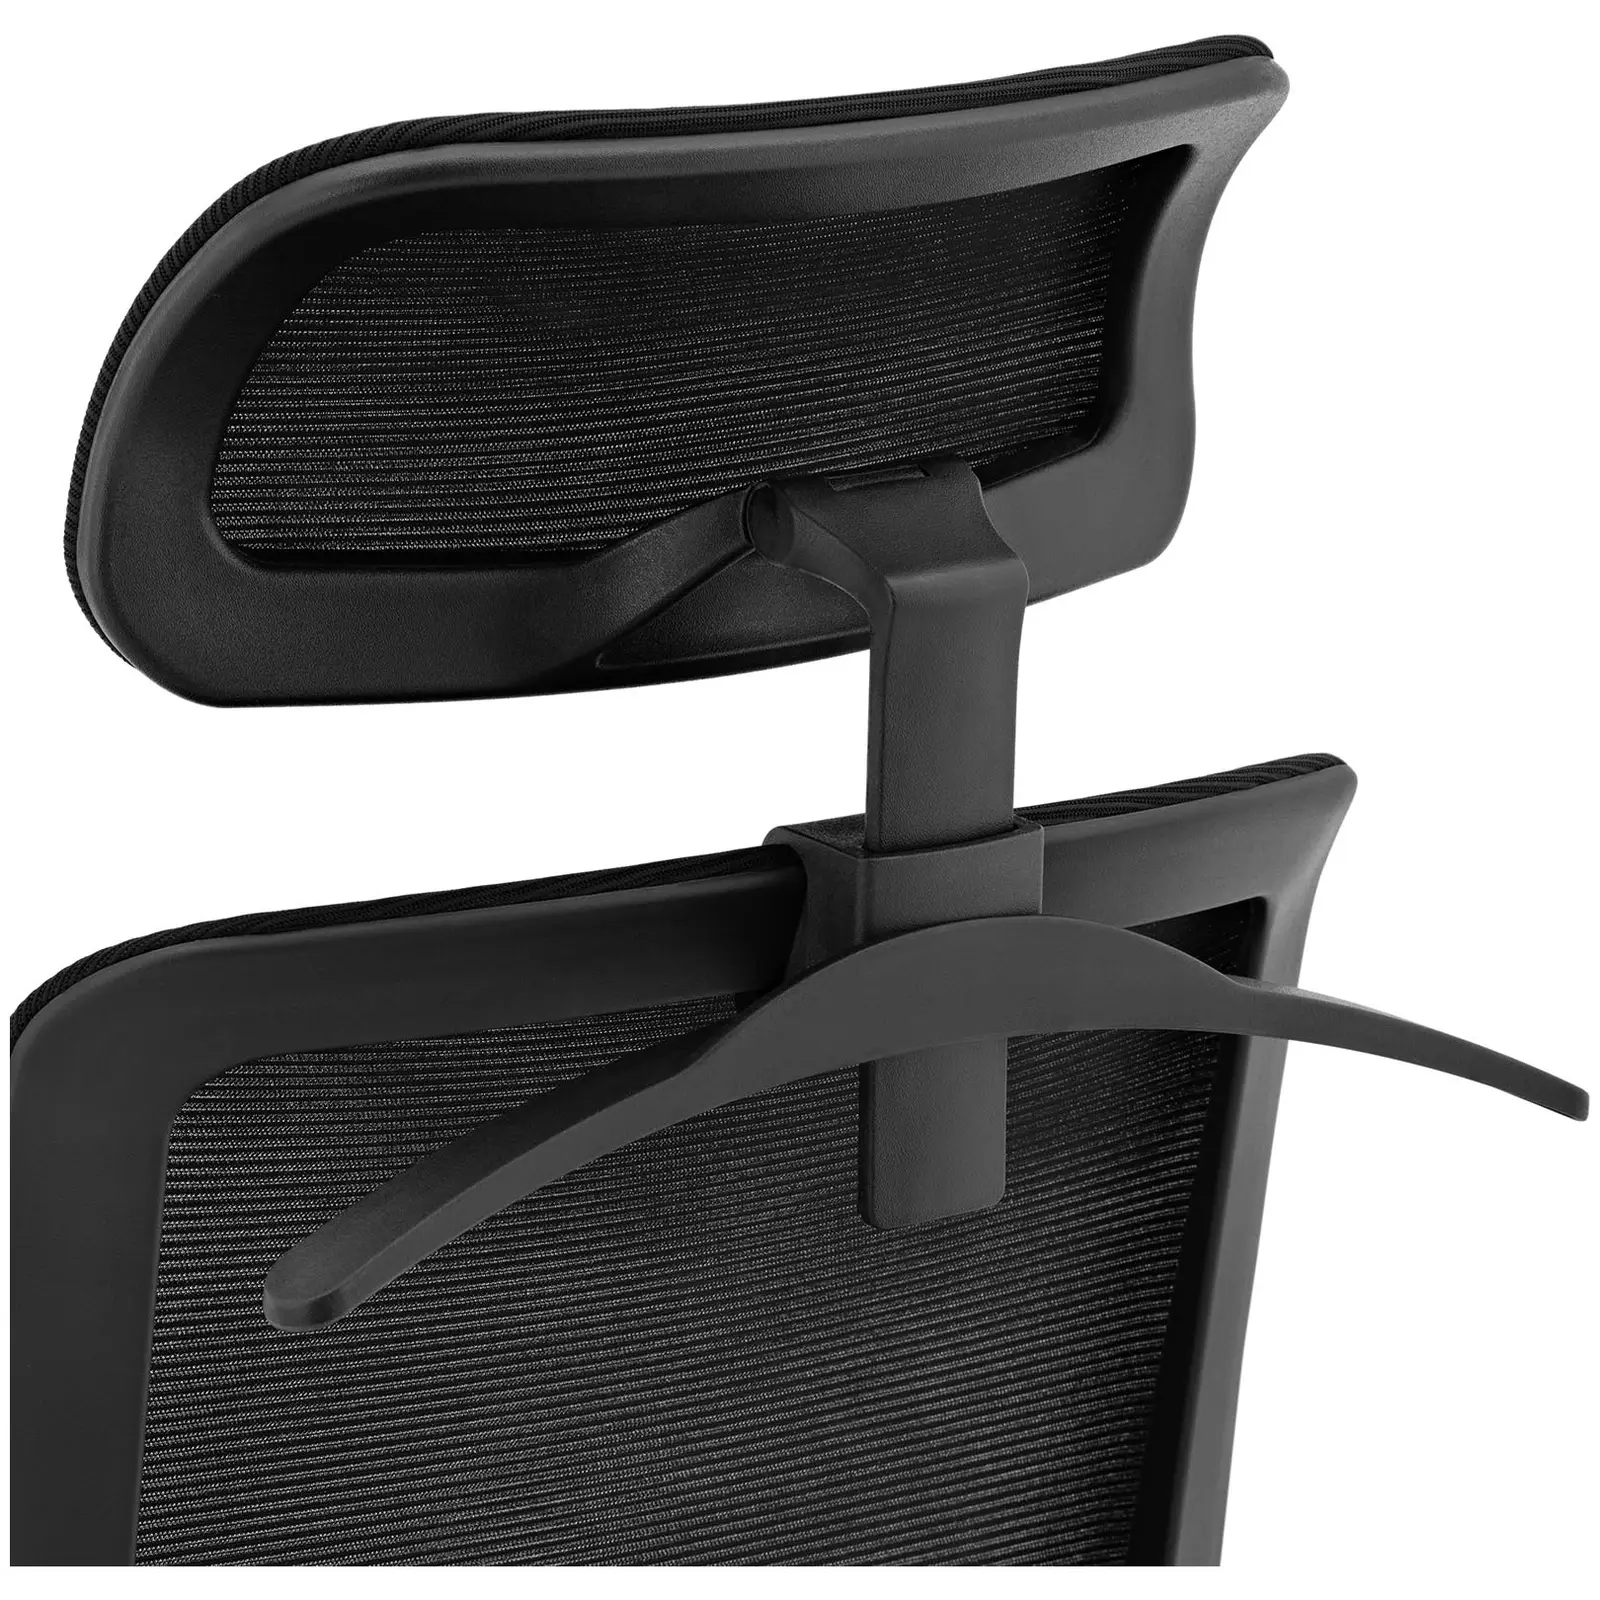 Office Chair - mesh back - headrest - 50 x 61 cm seat - up to 150 kg - black